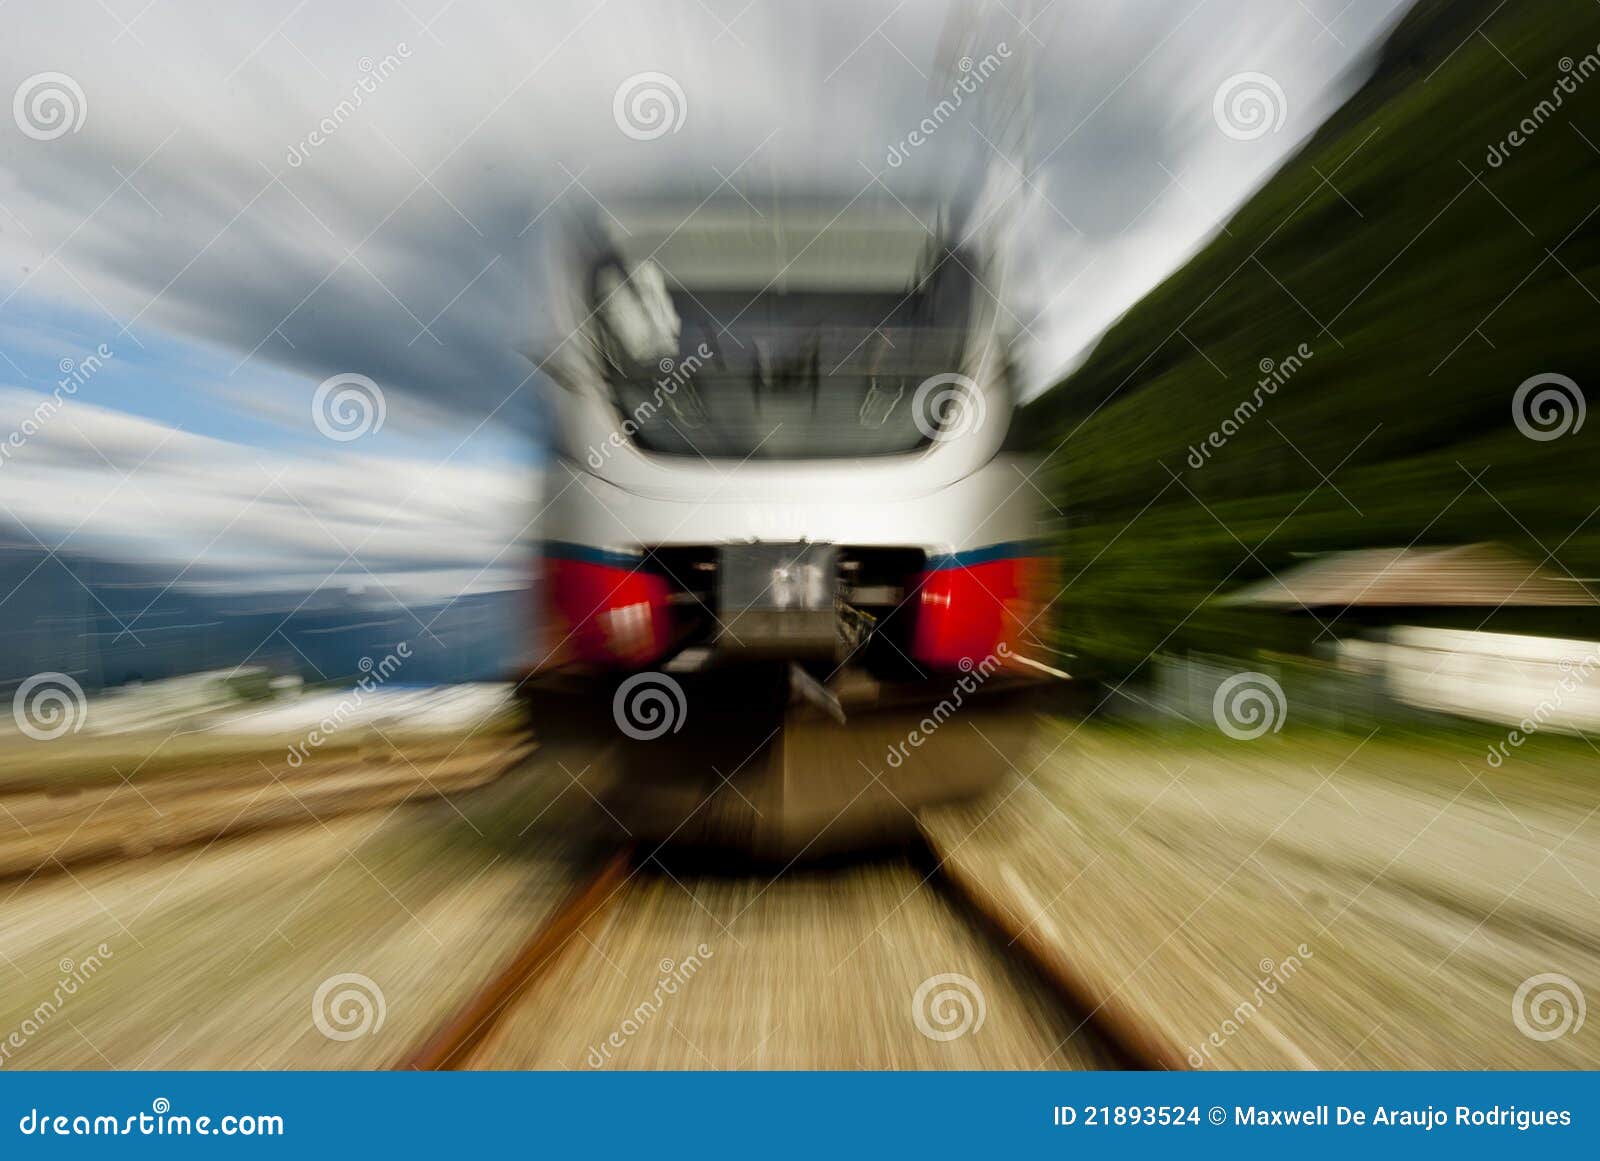 Head on view of fast train on railway track with slow motion blur.